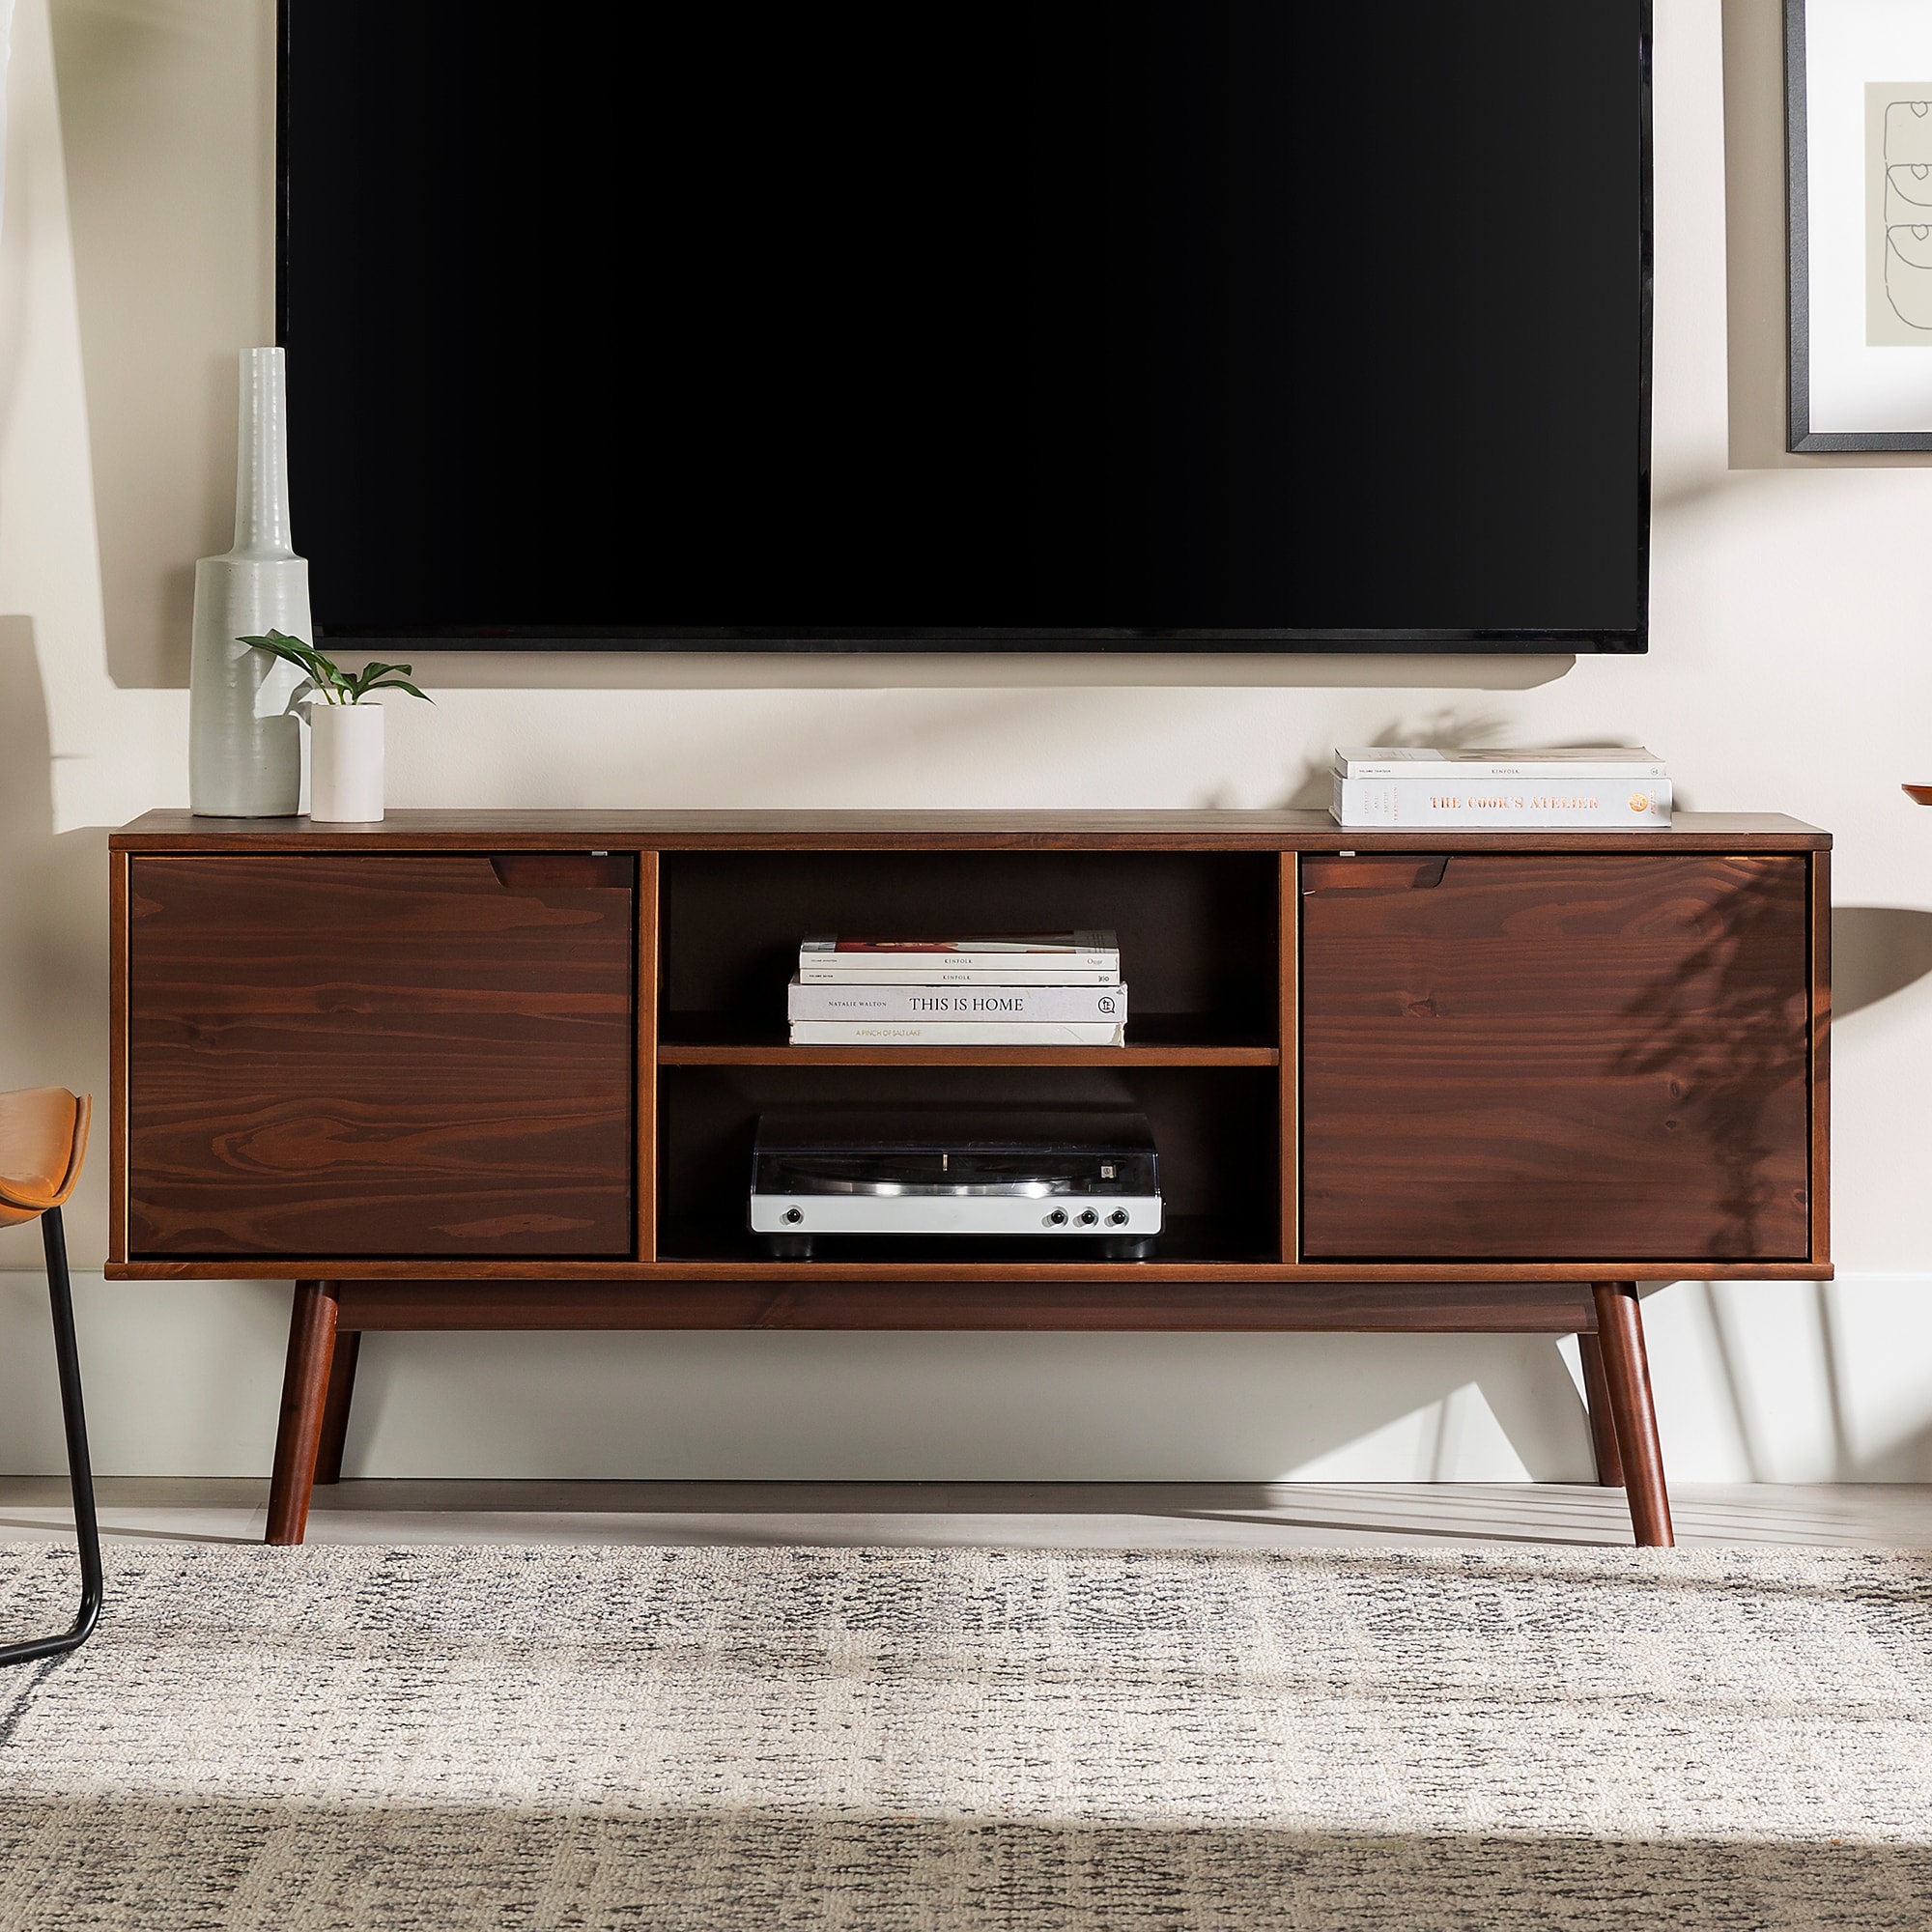 58 W. Trends Contemporary Wood TV Console - Gray